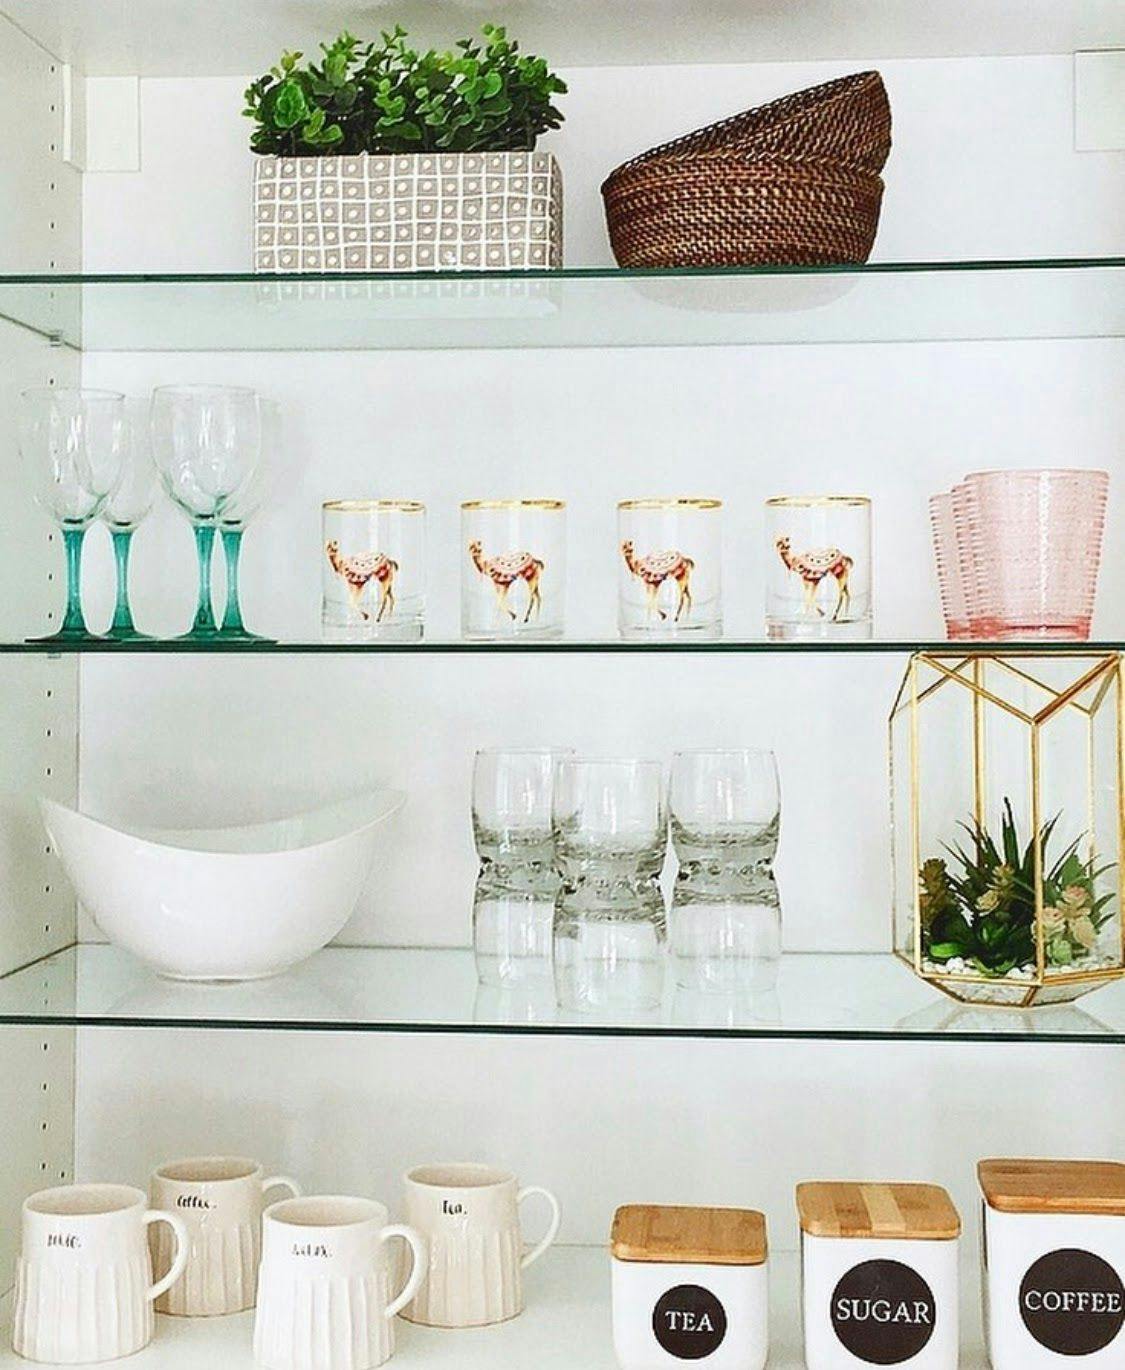 glass-shelves-with-colorful-kitchenware.jpg